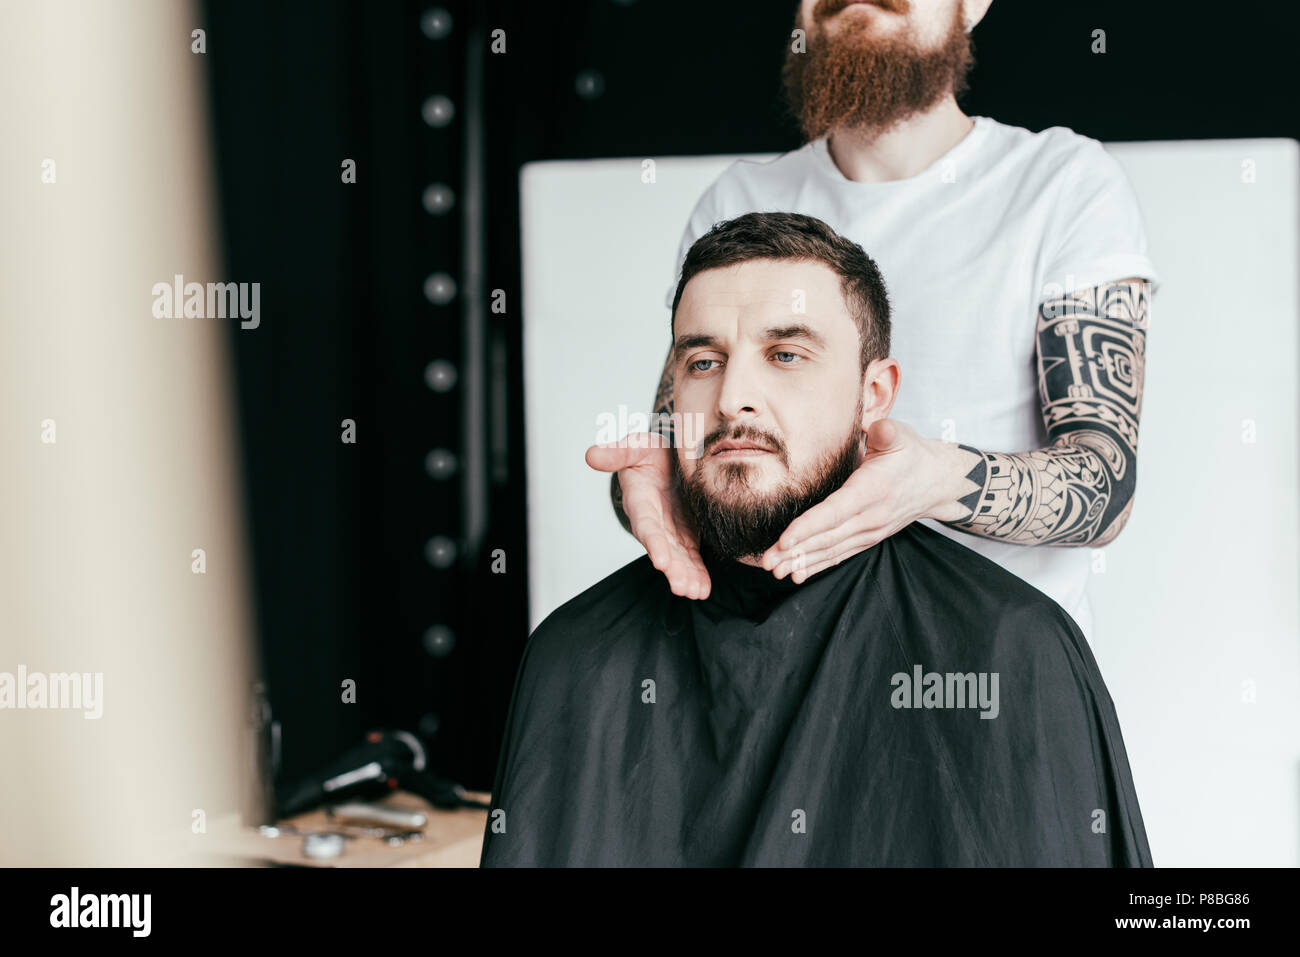 cropped image of barber styling customer beard at barbershop Stock Photo